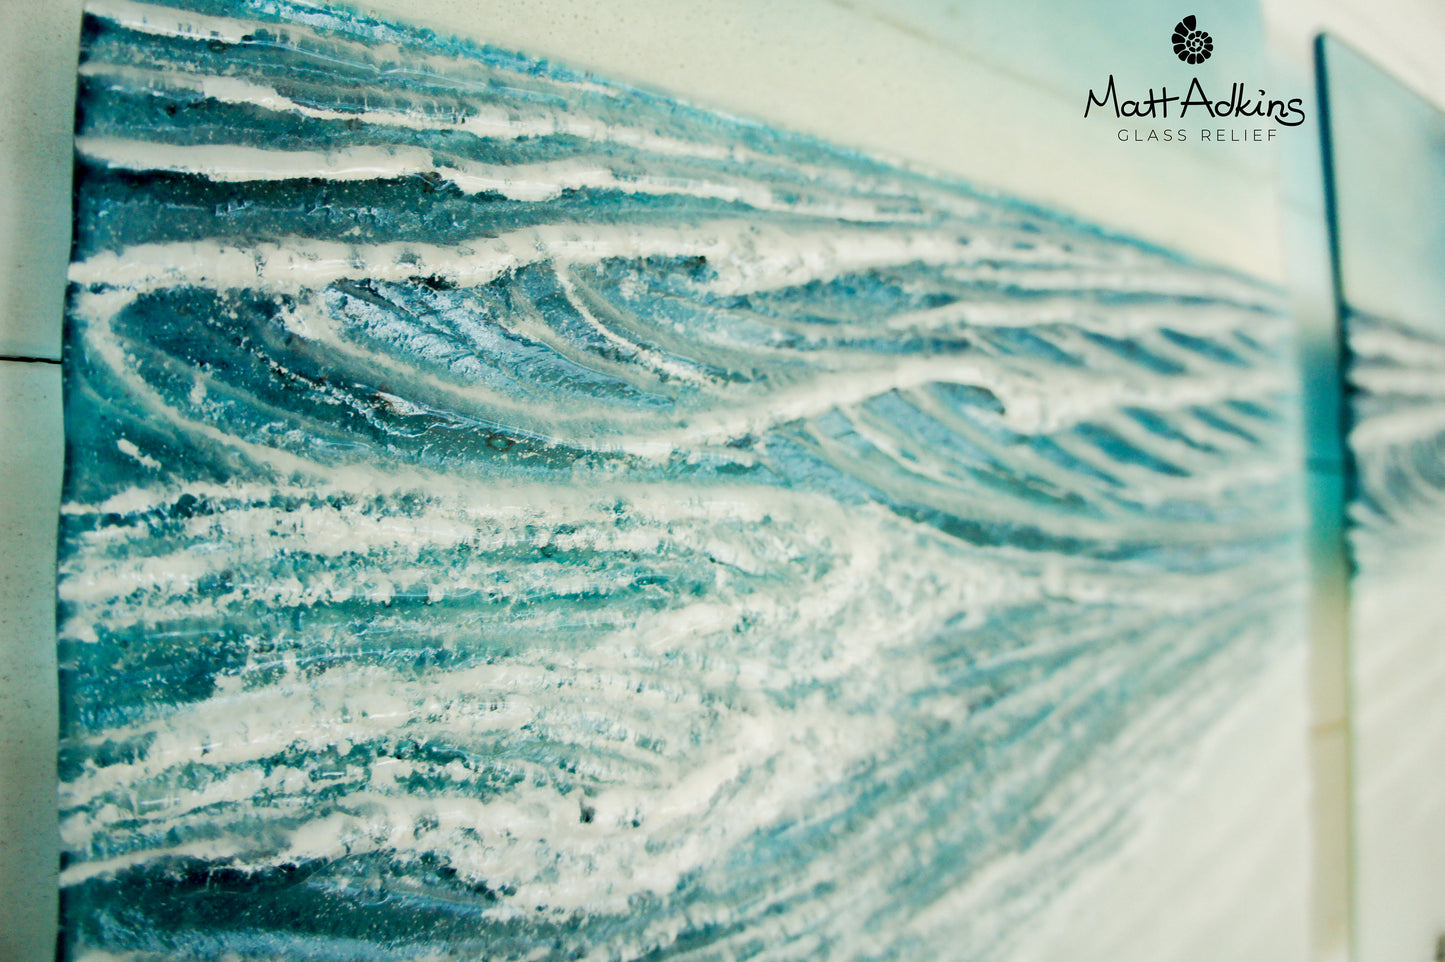 Triptych Coastal Wave Wall Panels - Left&Right 35x40cm (14x16")/Middle 40x40cm (16x16") with 9 fixings